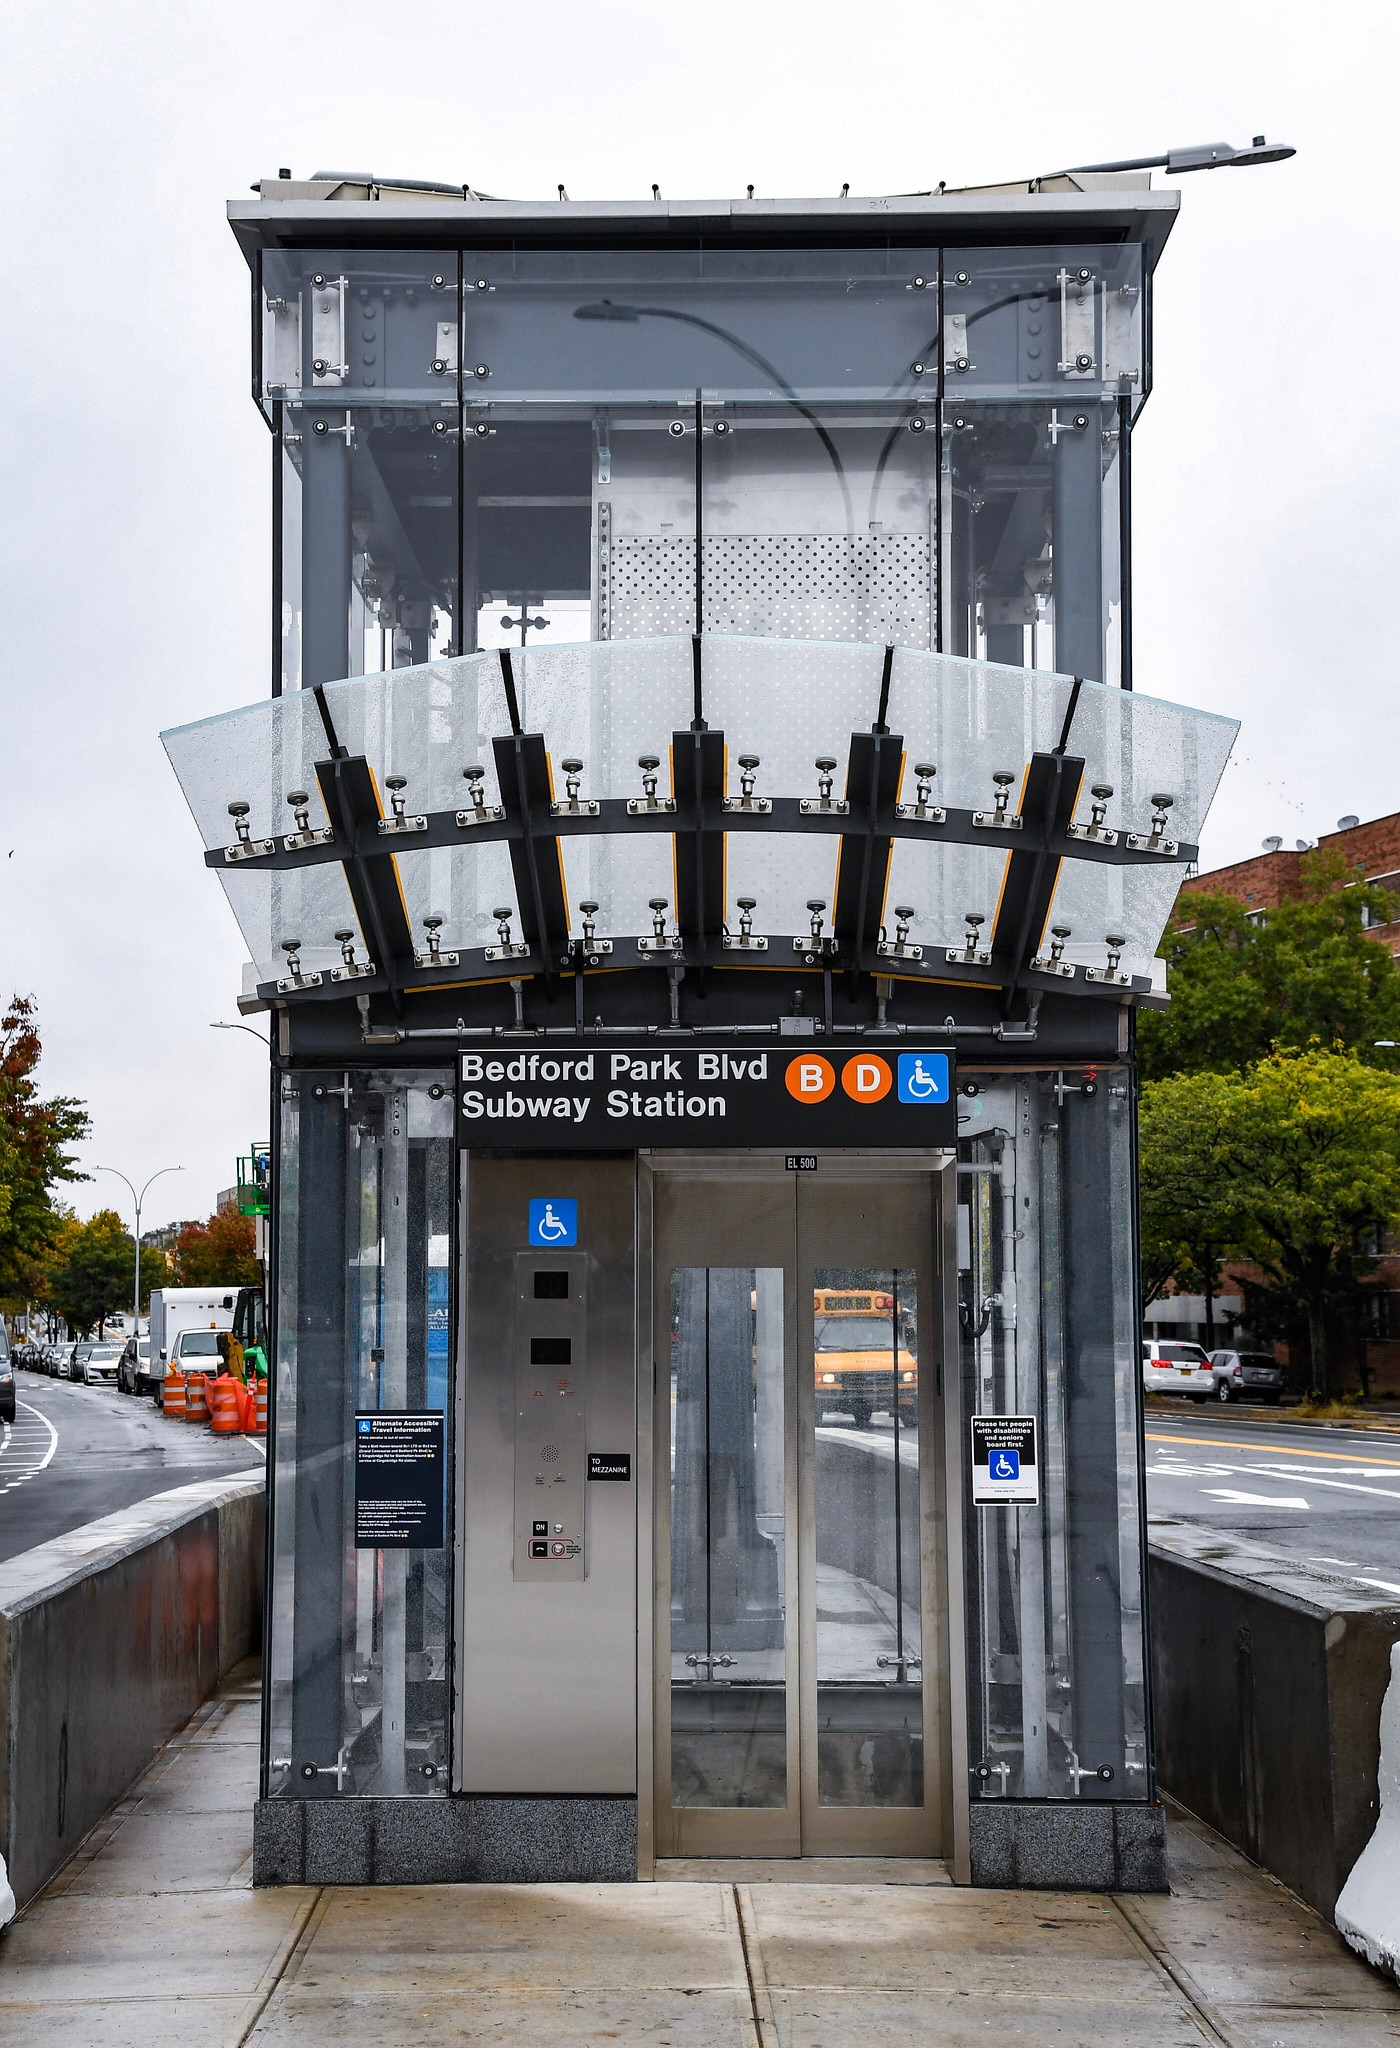 MTA Announces Newly Accessible Bedford Park Blvd B/D Station in The Bronx